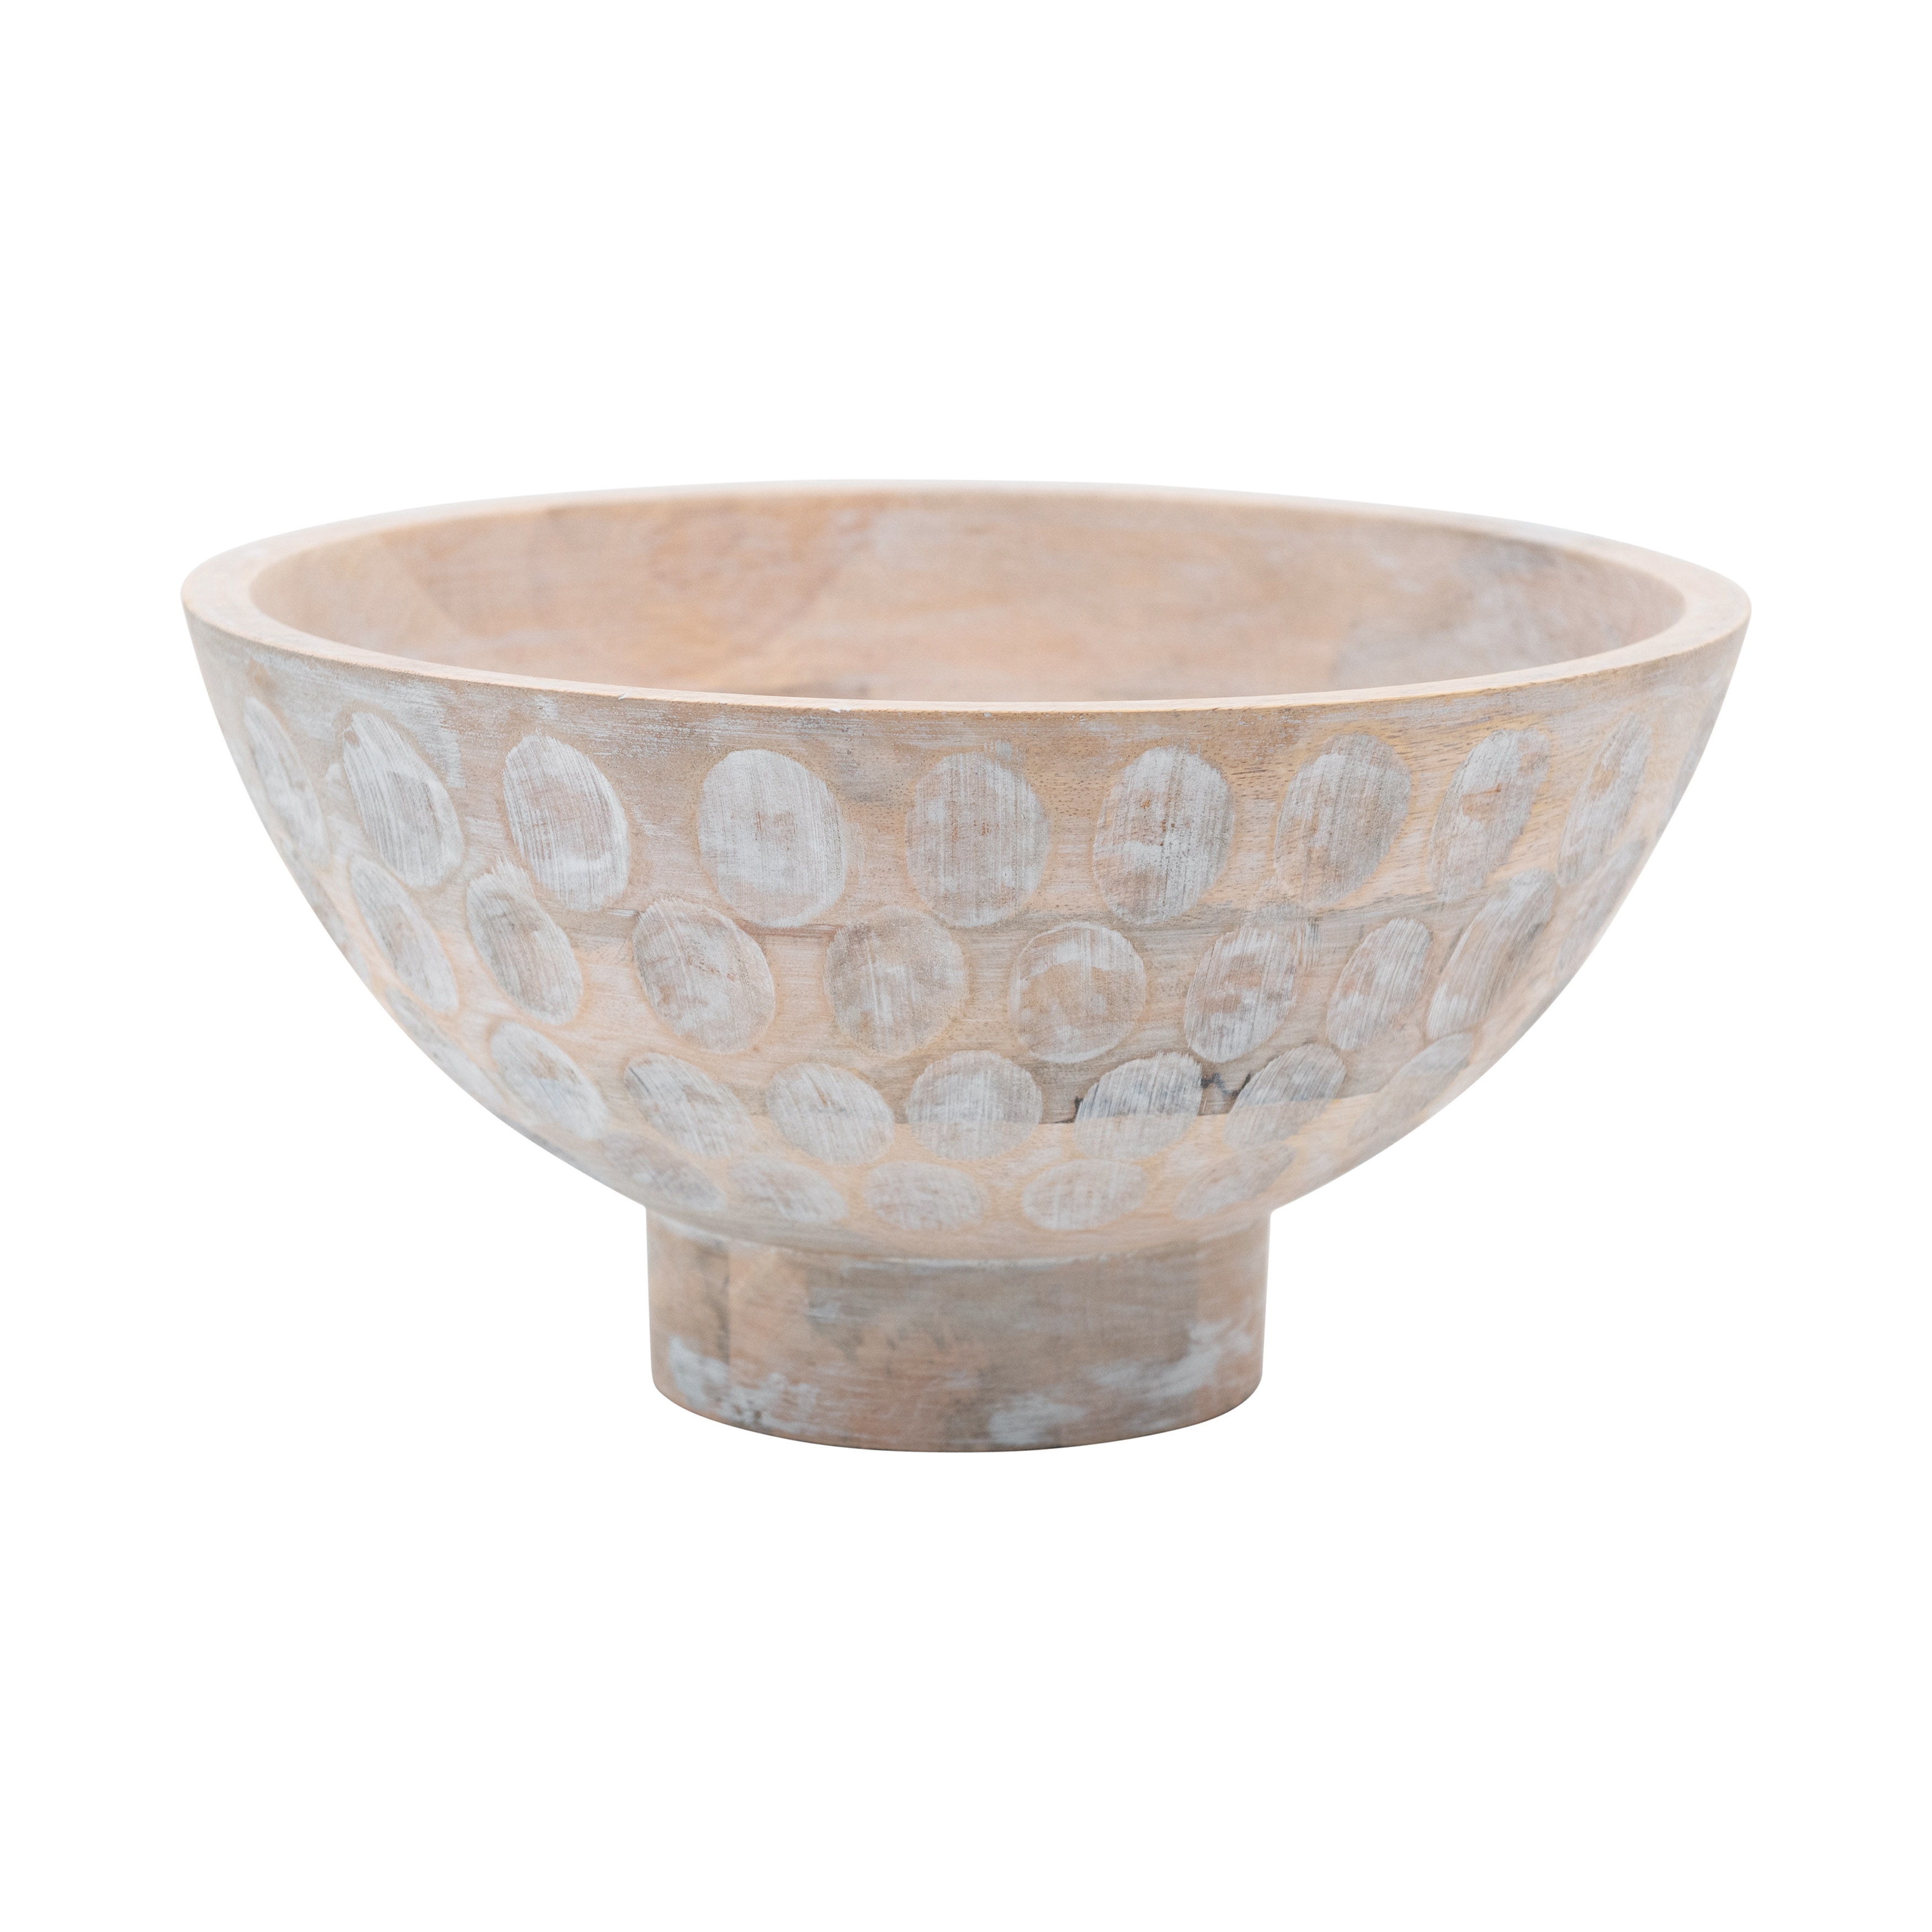 Mango Wood Footed Bowl with Carved Circle Accents and Whitewashed Finish - Image 0